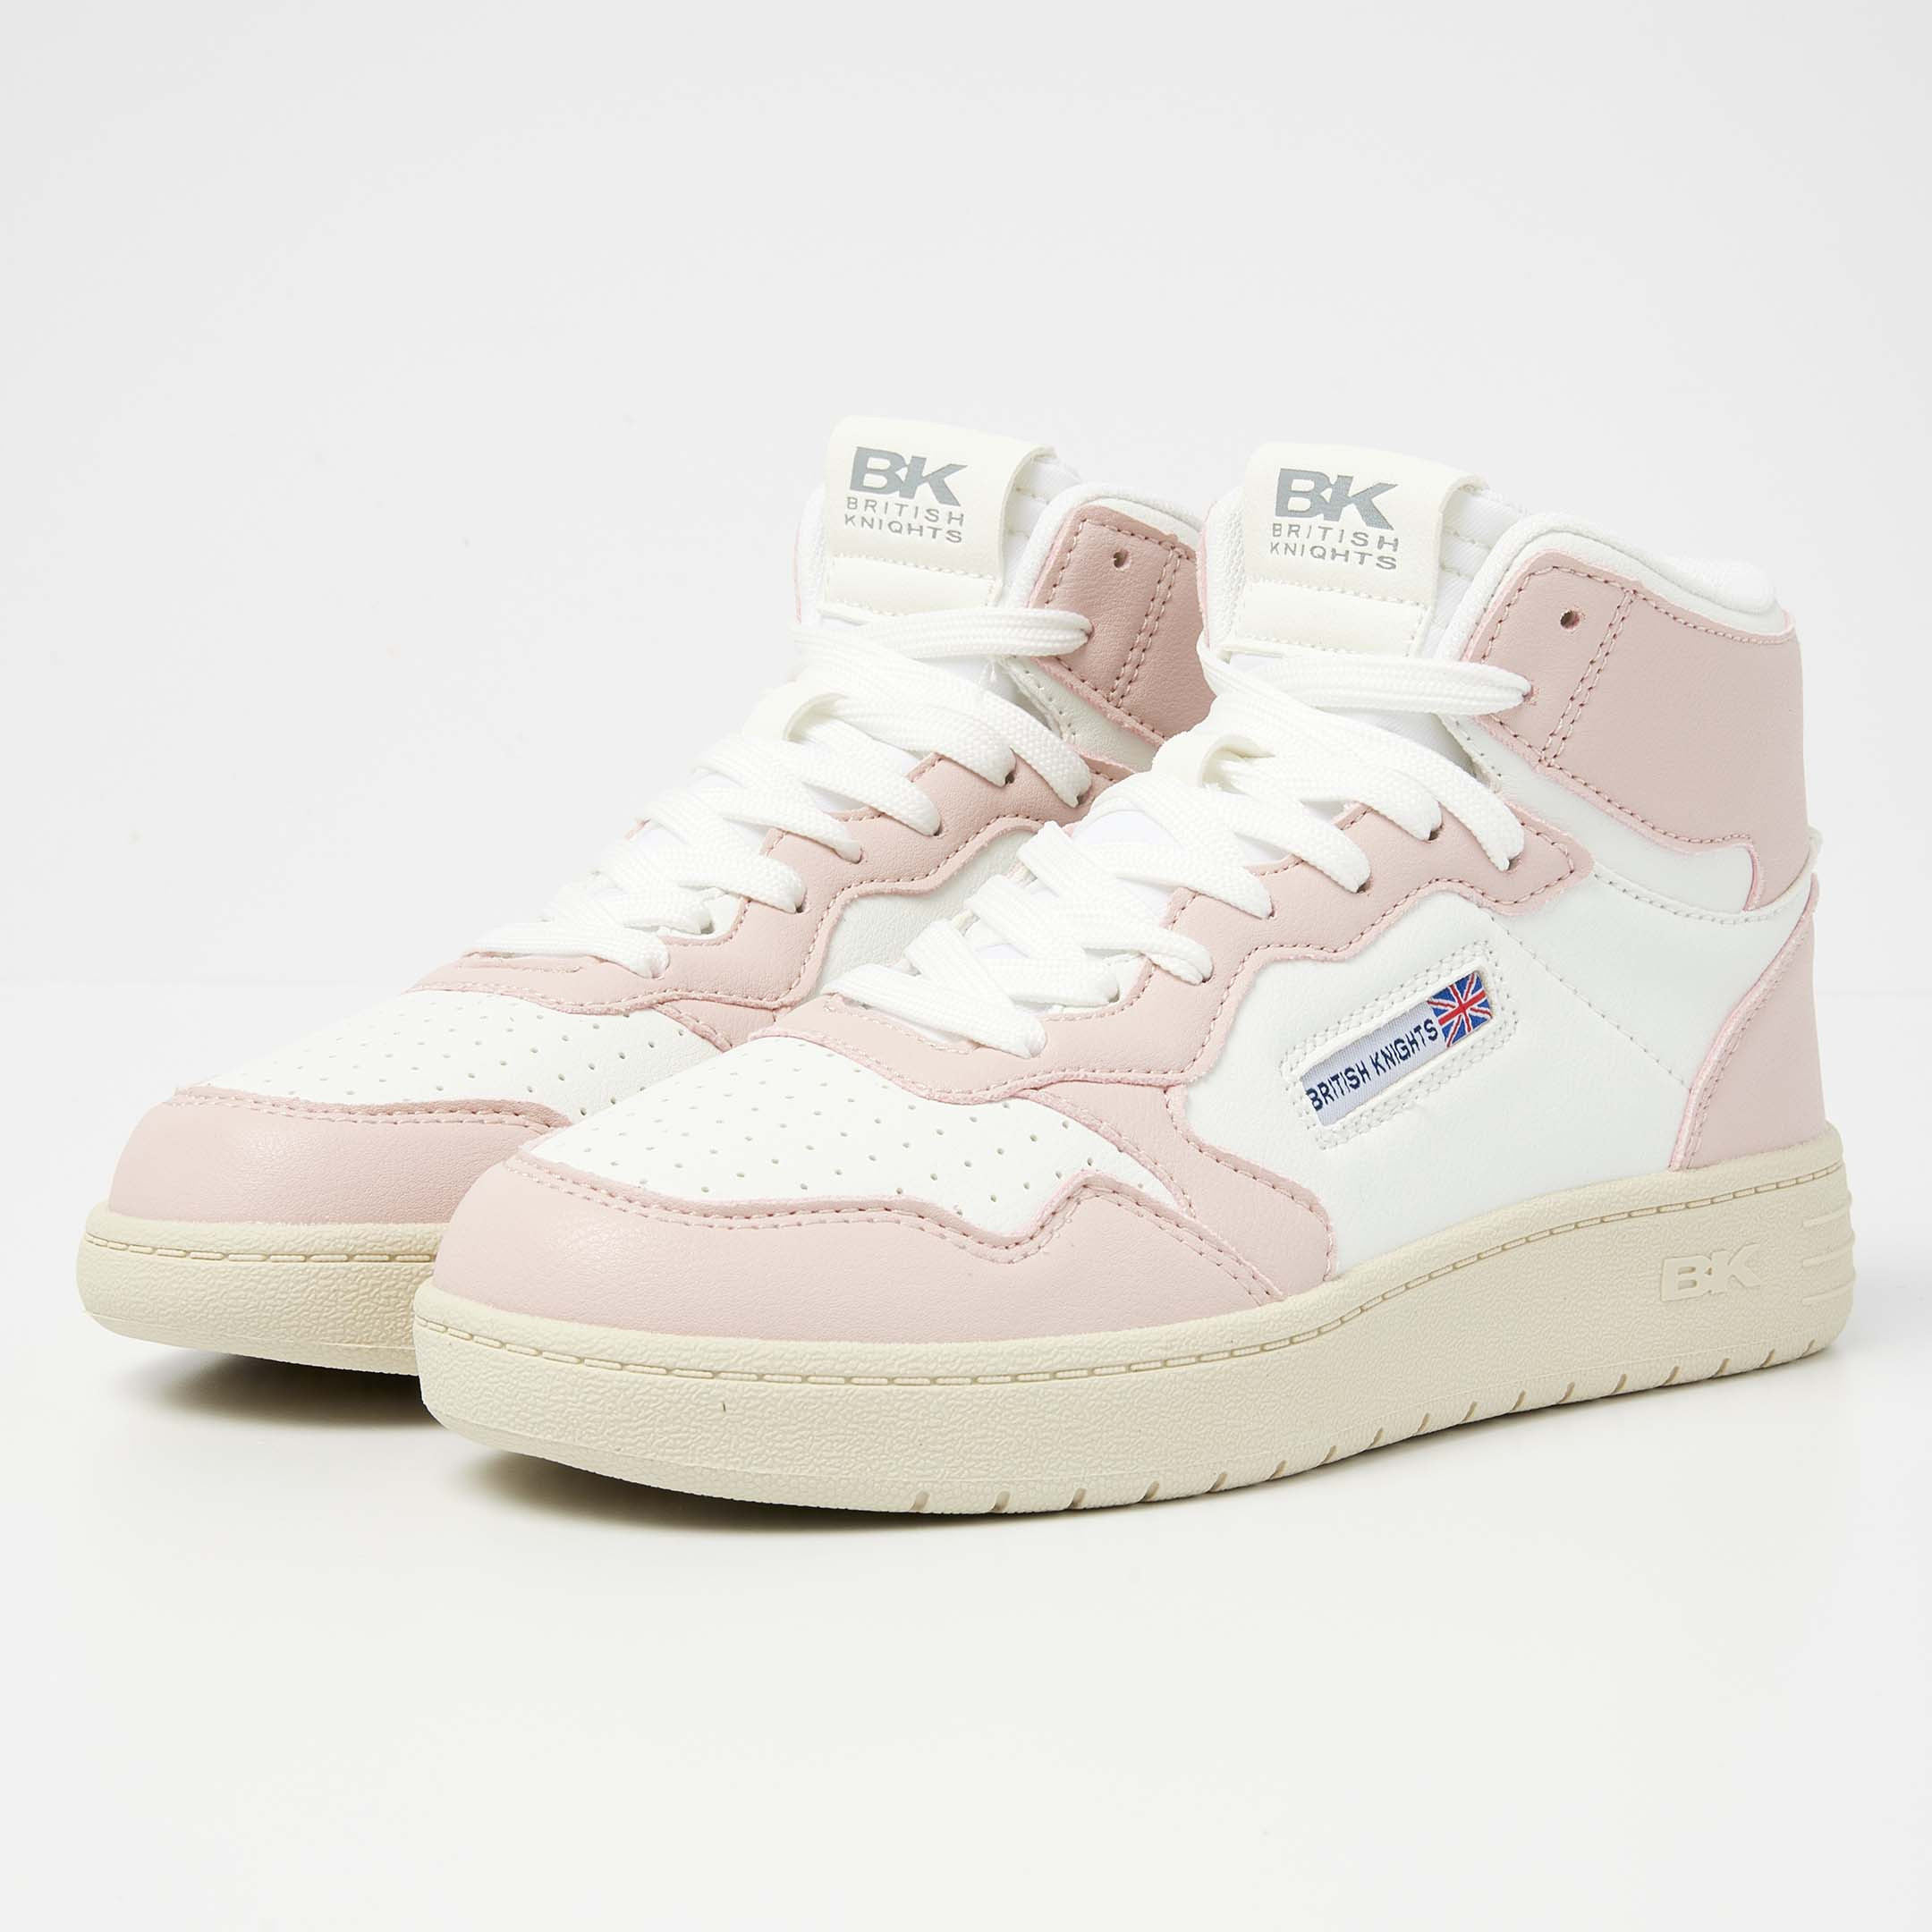 British Knights Sneaker Front view  B53-3617-02 NOORS MID HIGH-TOP FEMALE